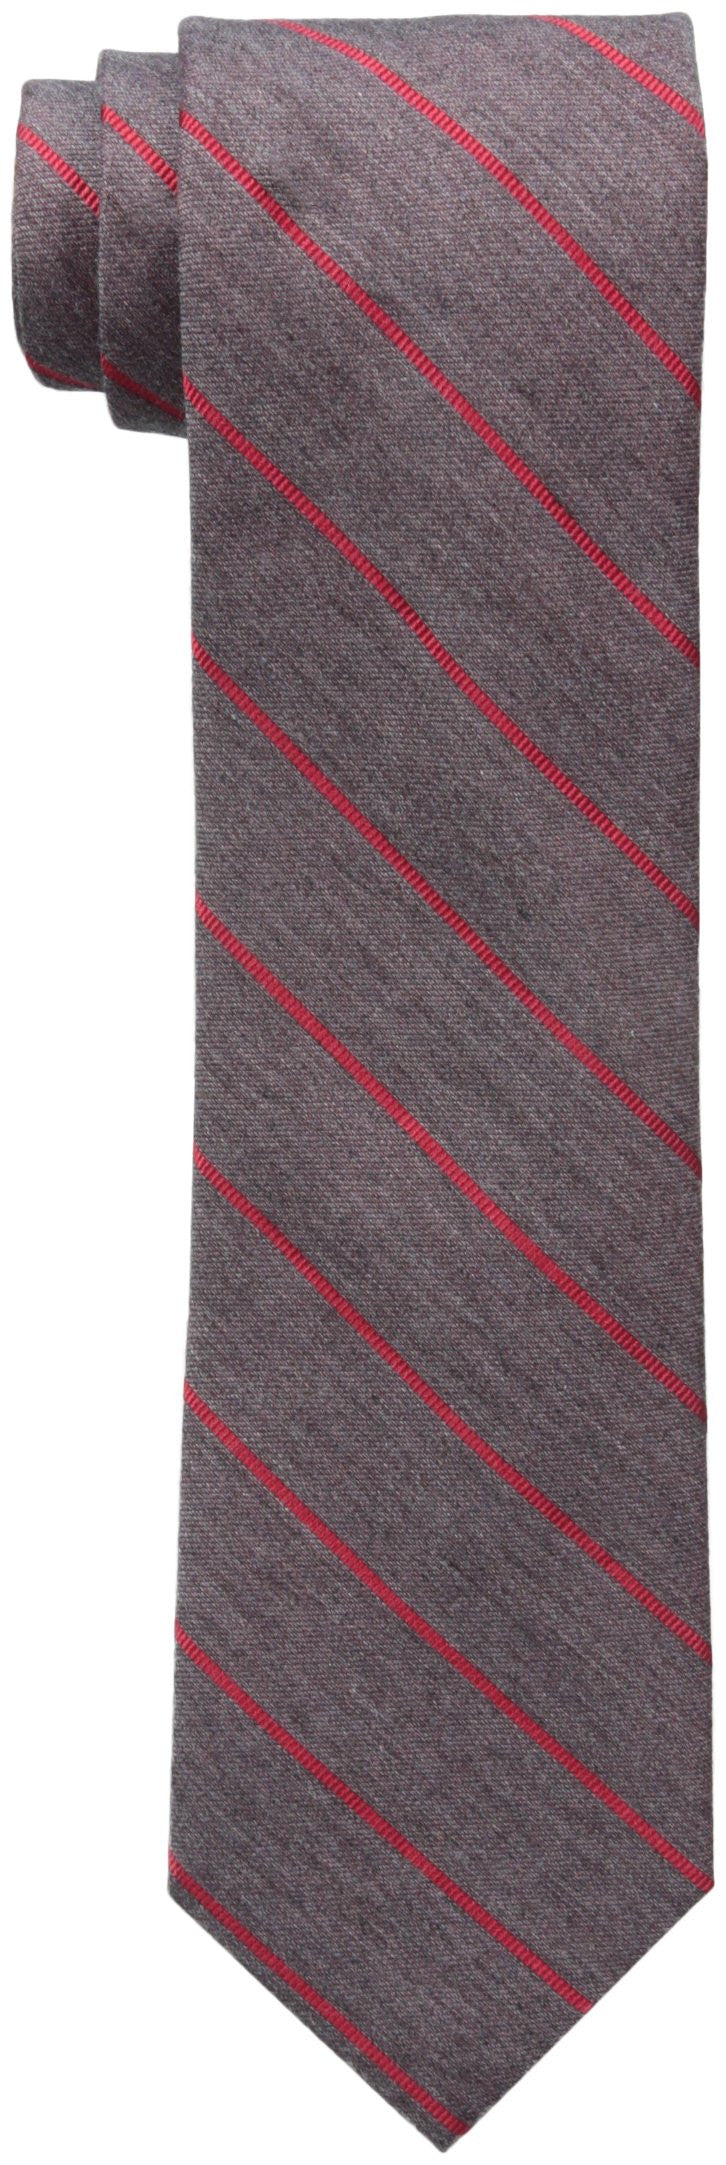 Calvin Klein Red Hot Repp Stripe Tie Charcoal One Size